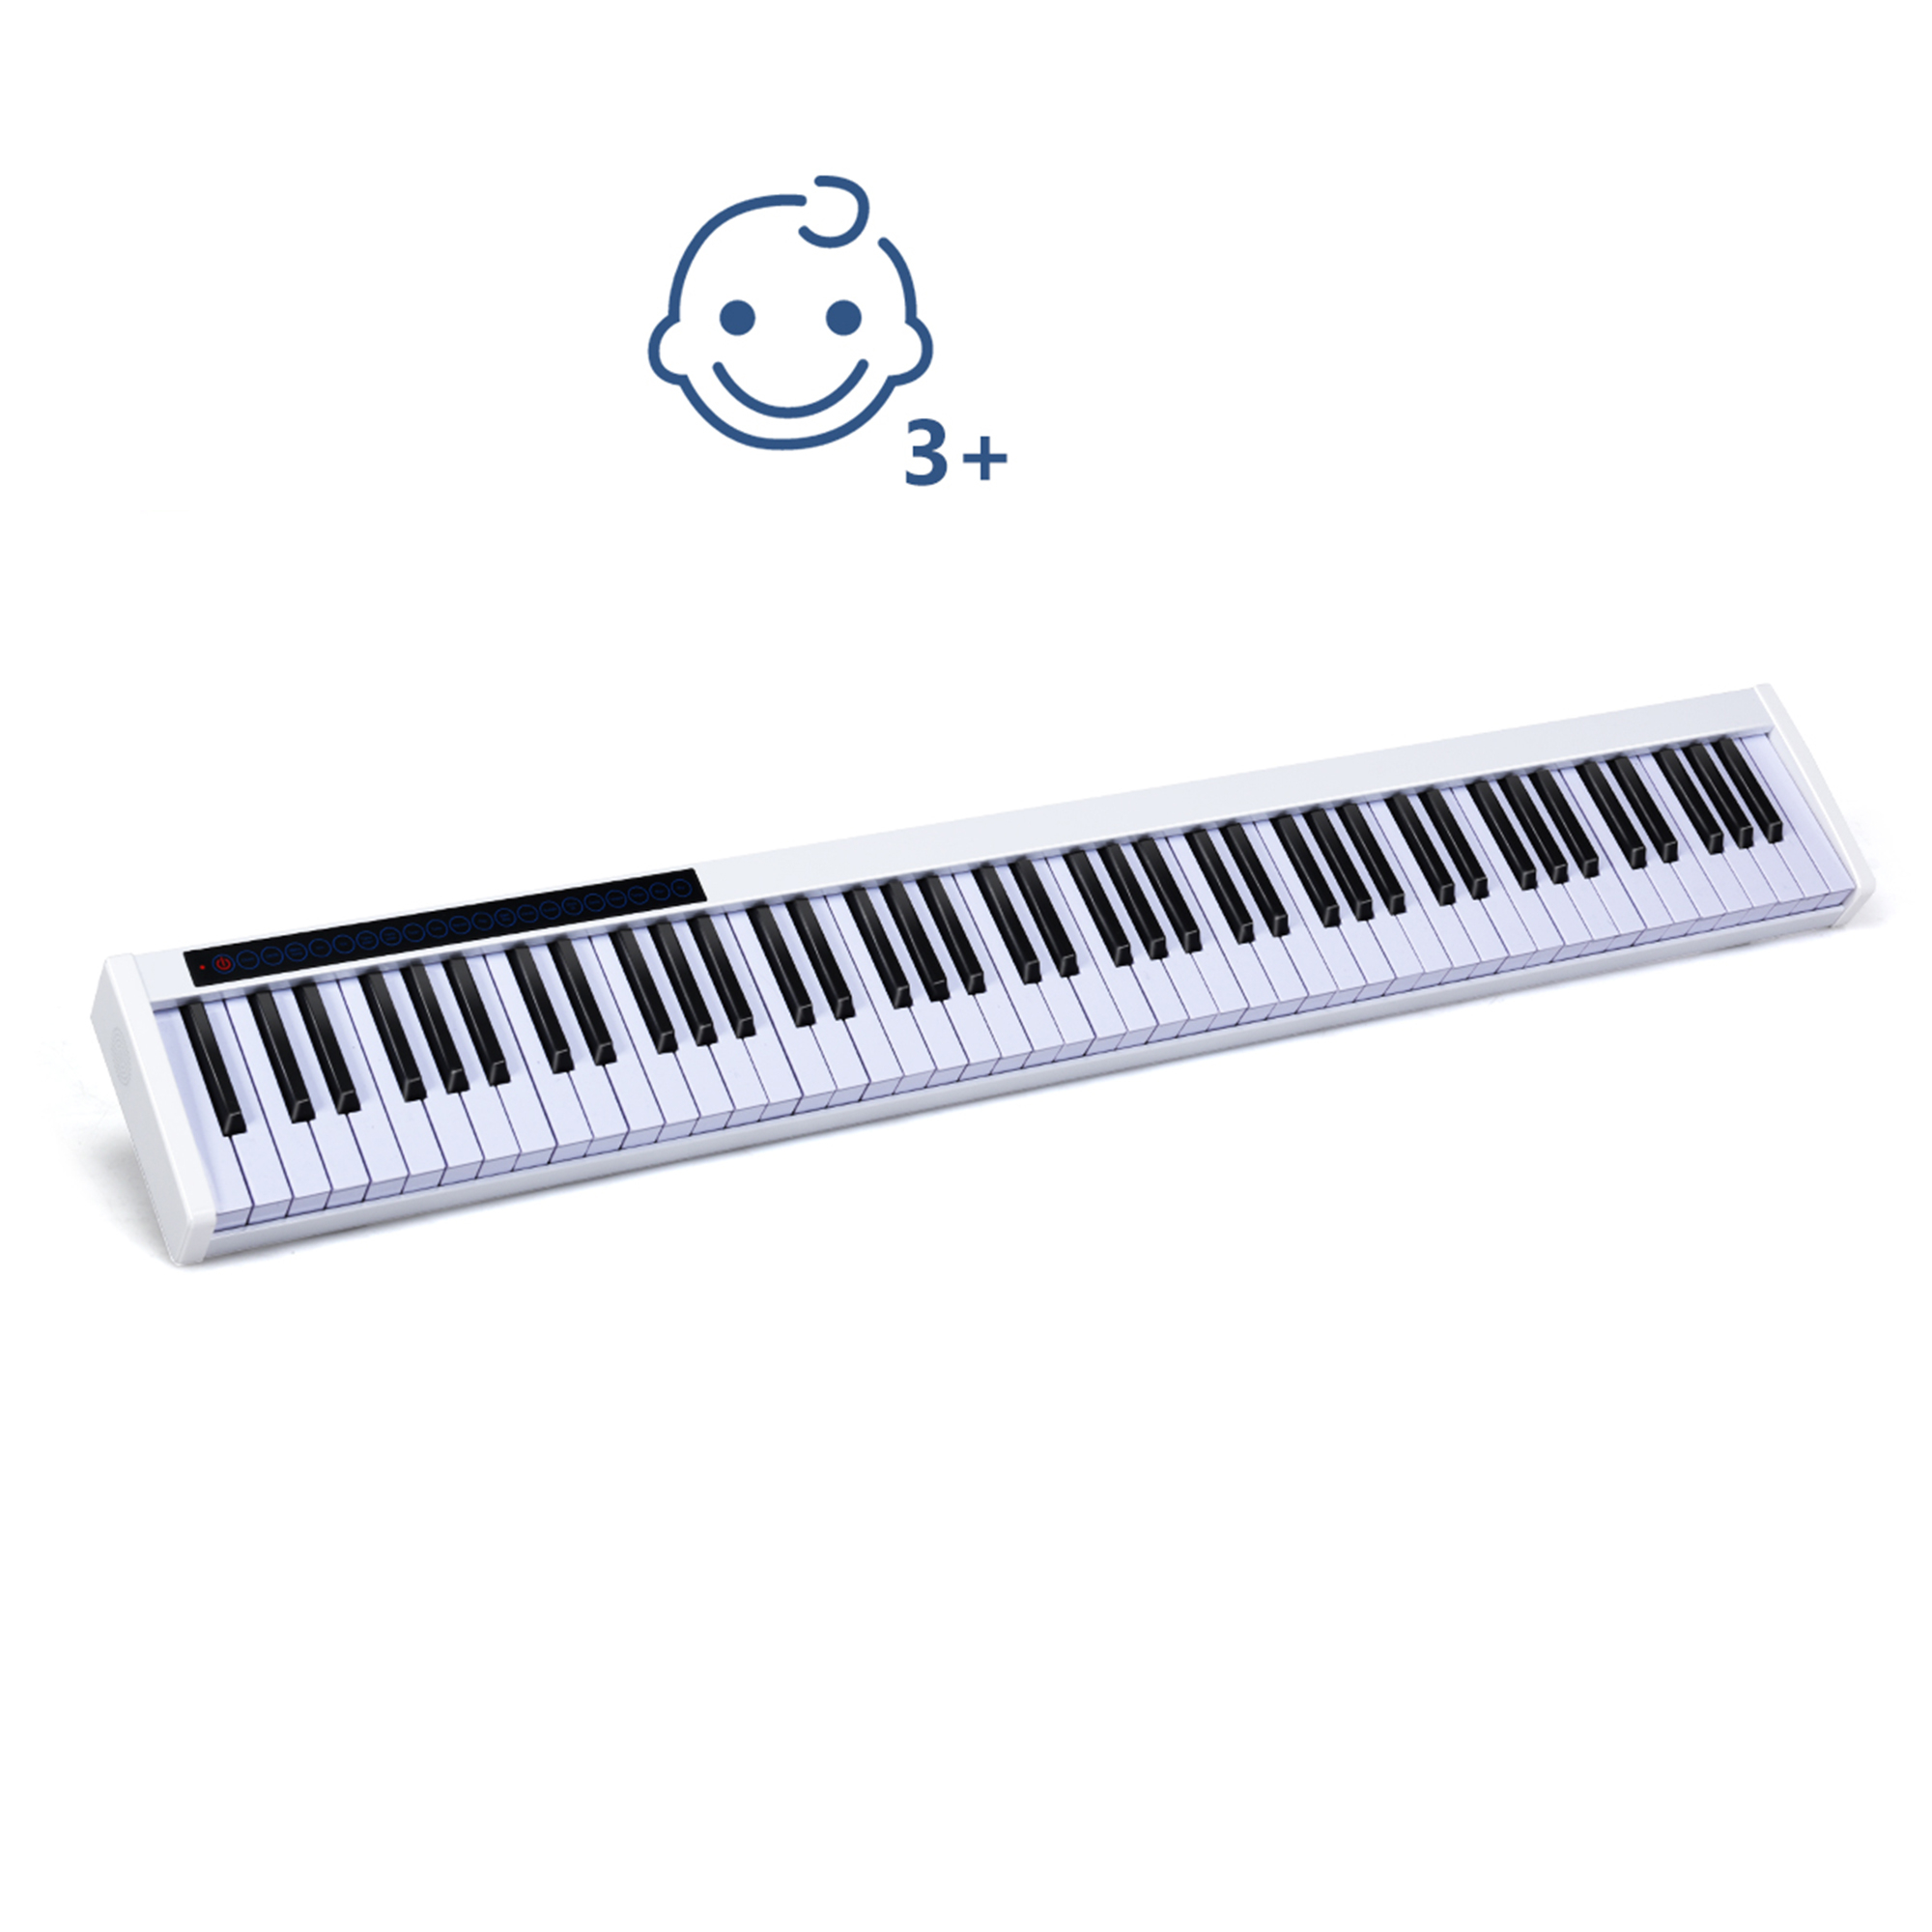 Topbuy 88-Key Digital Piano Portable Electric Keyboard with Carrying Bag White